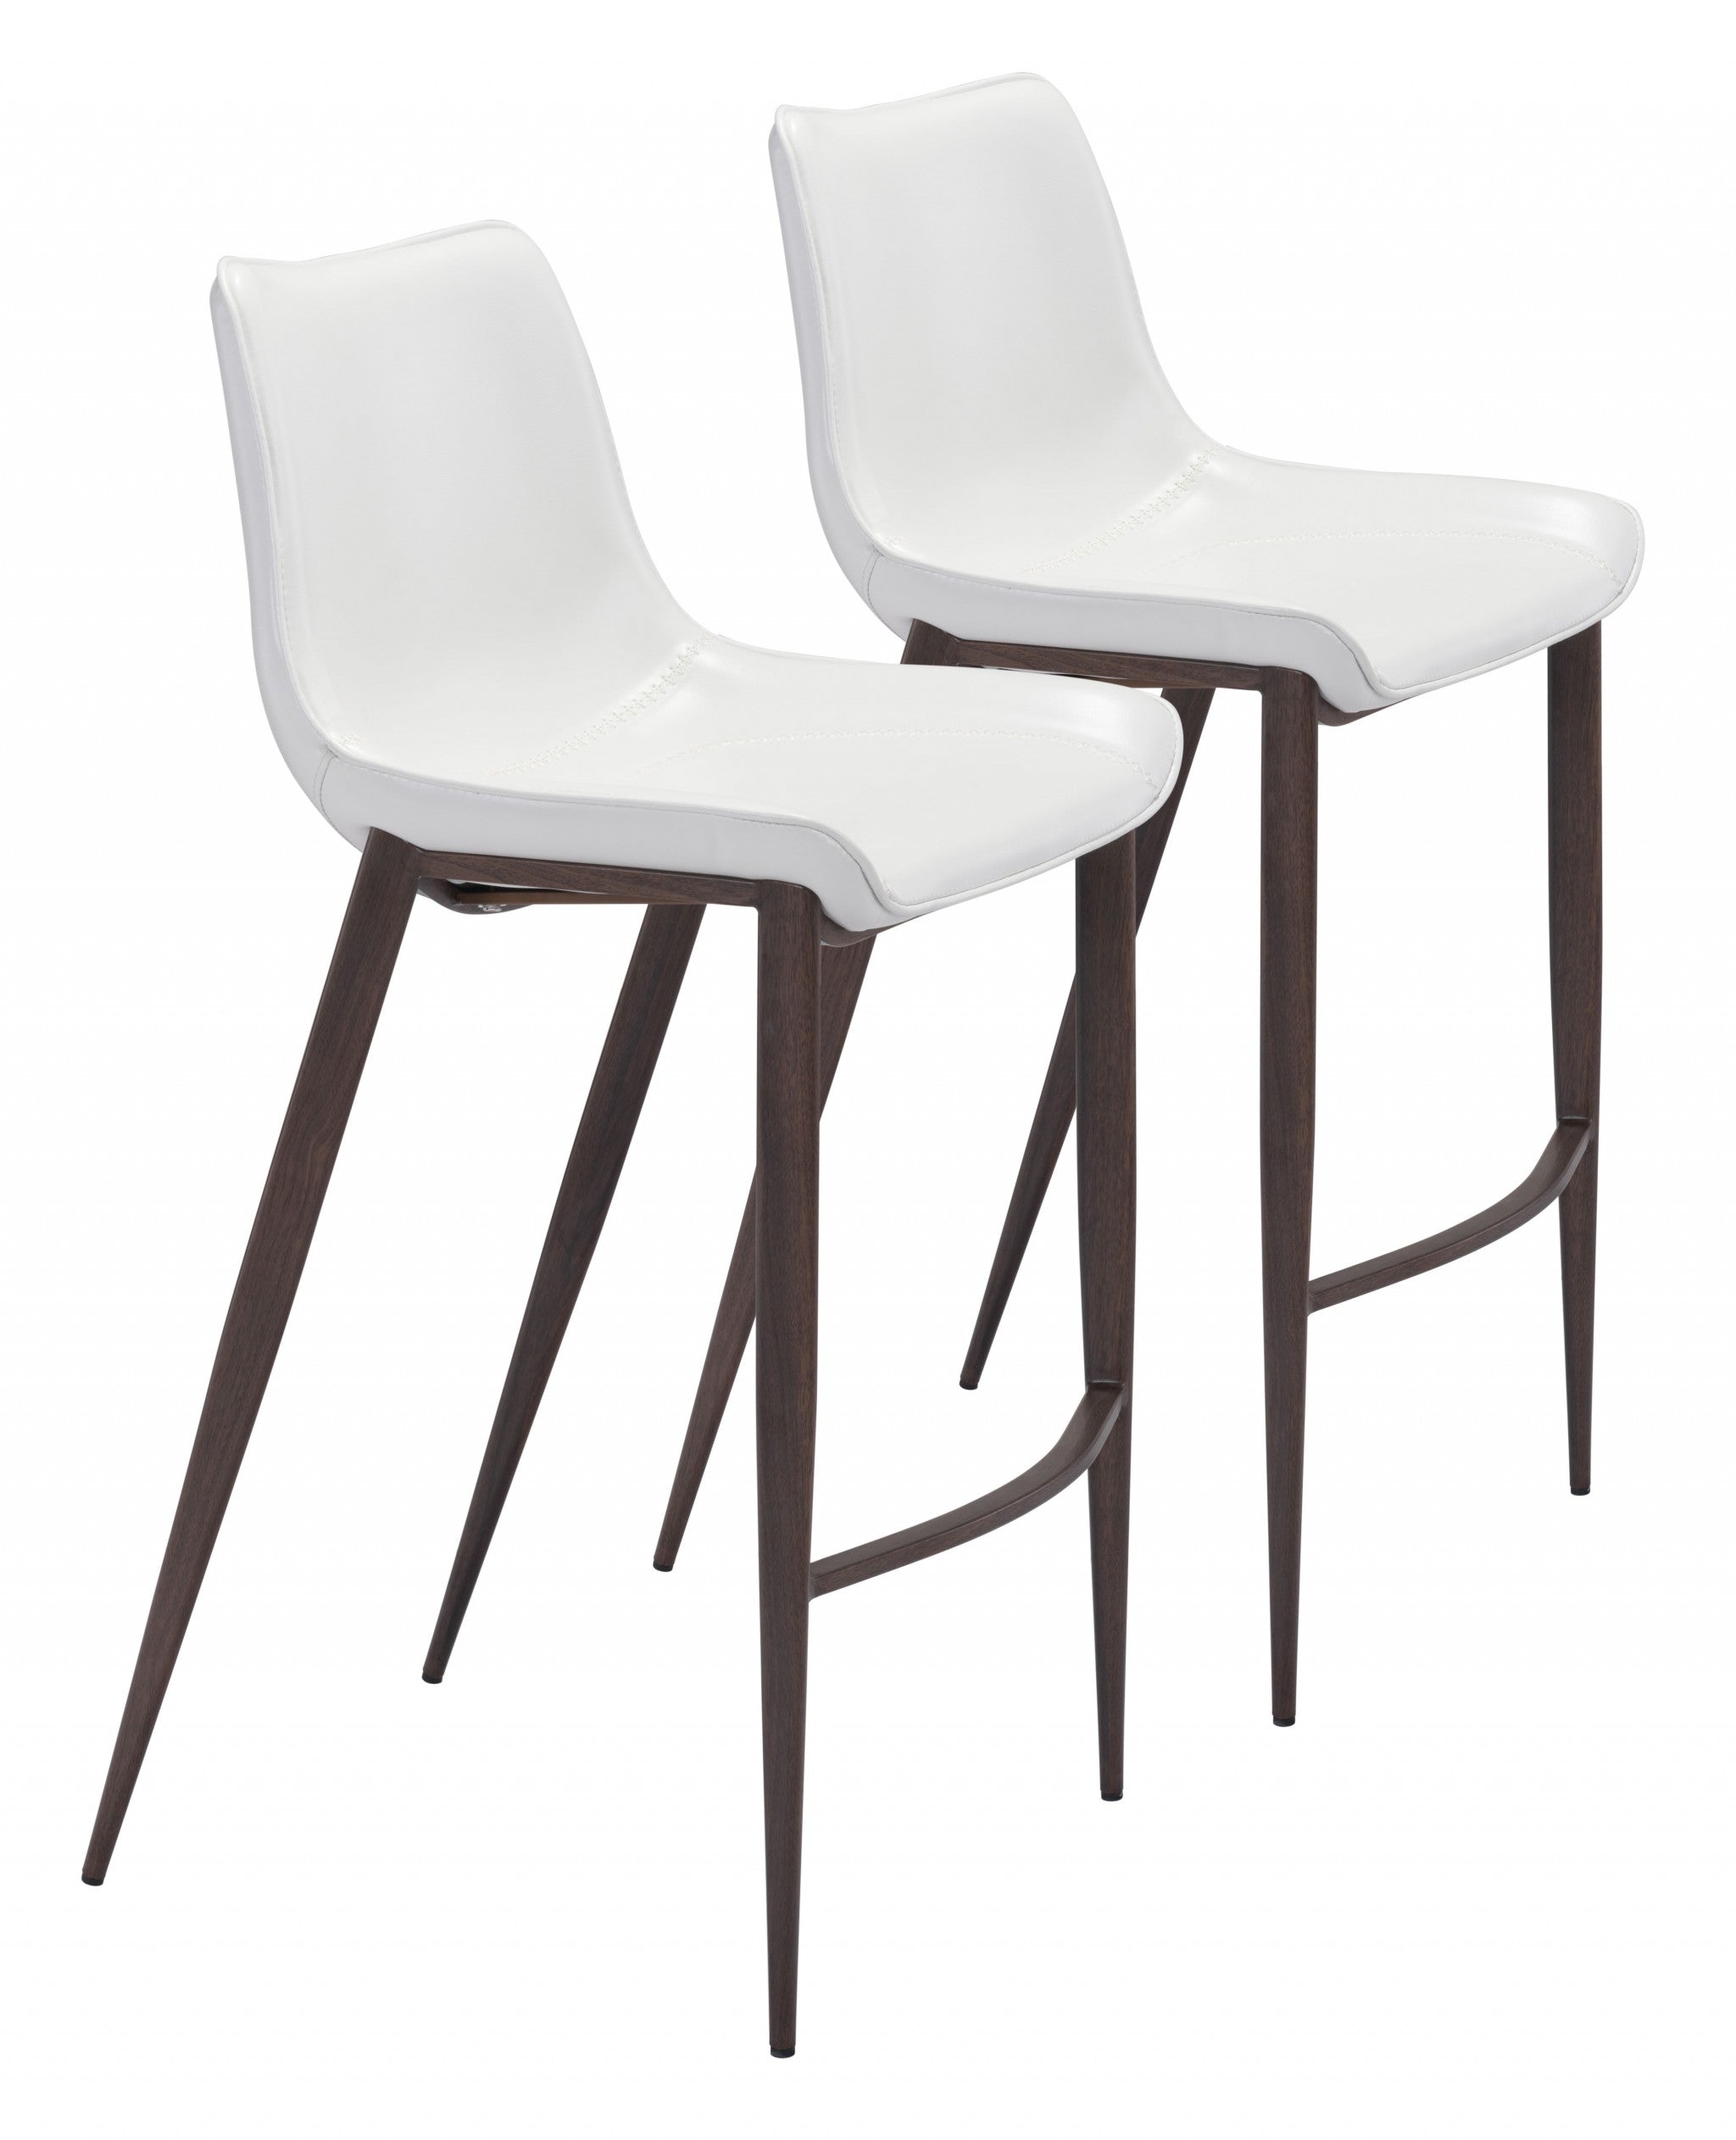 Set of Two 30" White And Brown Steel Low Back Bar Height Bar Chairs